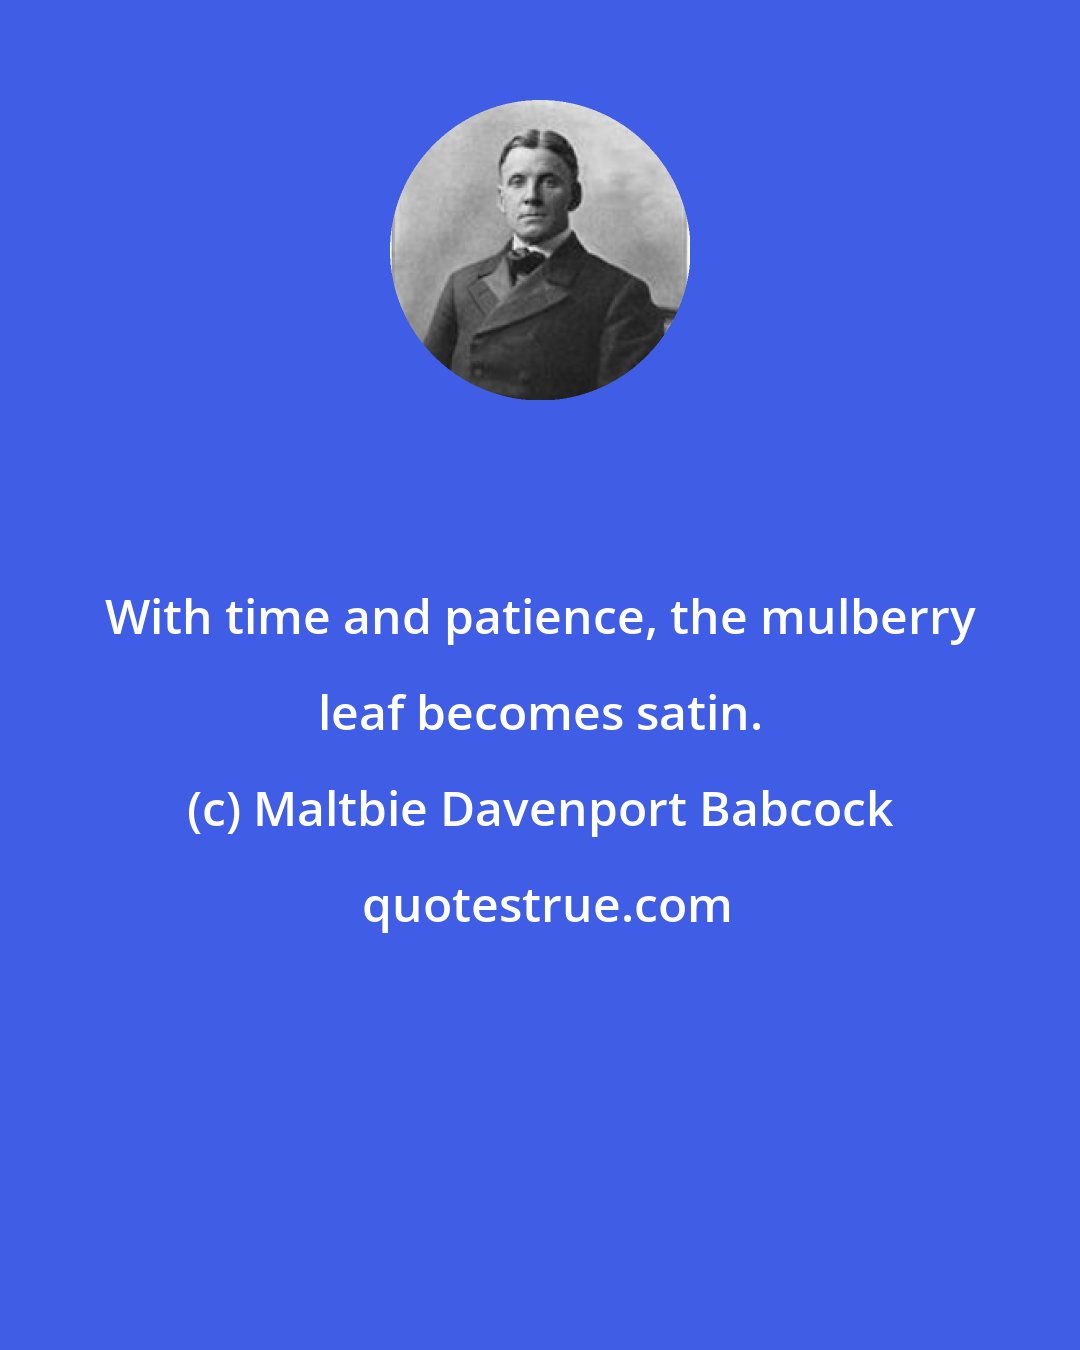 Maltbie Davenport Babcock: With time and patience, the mulberry leaf becomes satin.